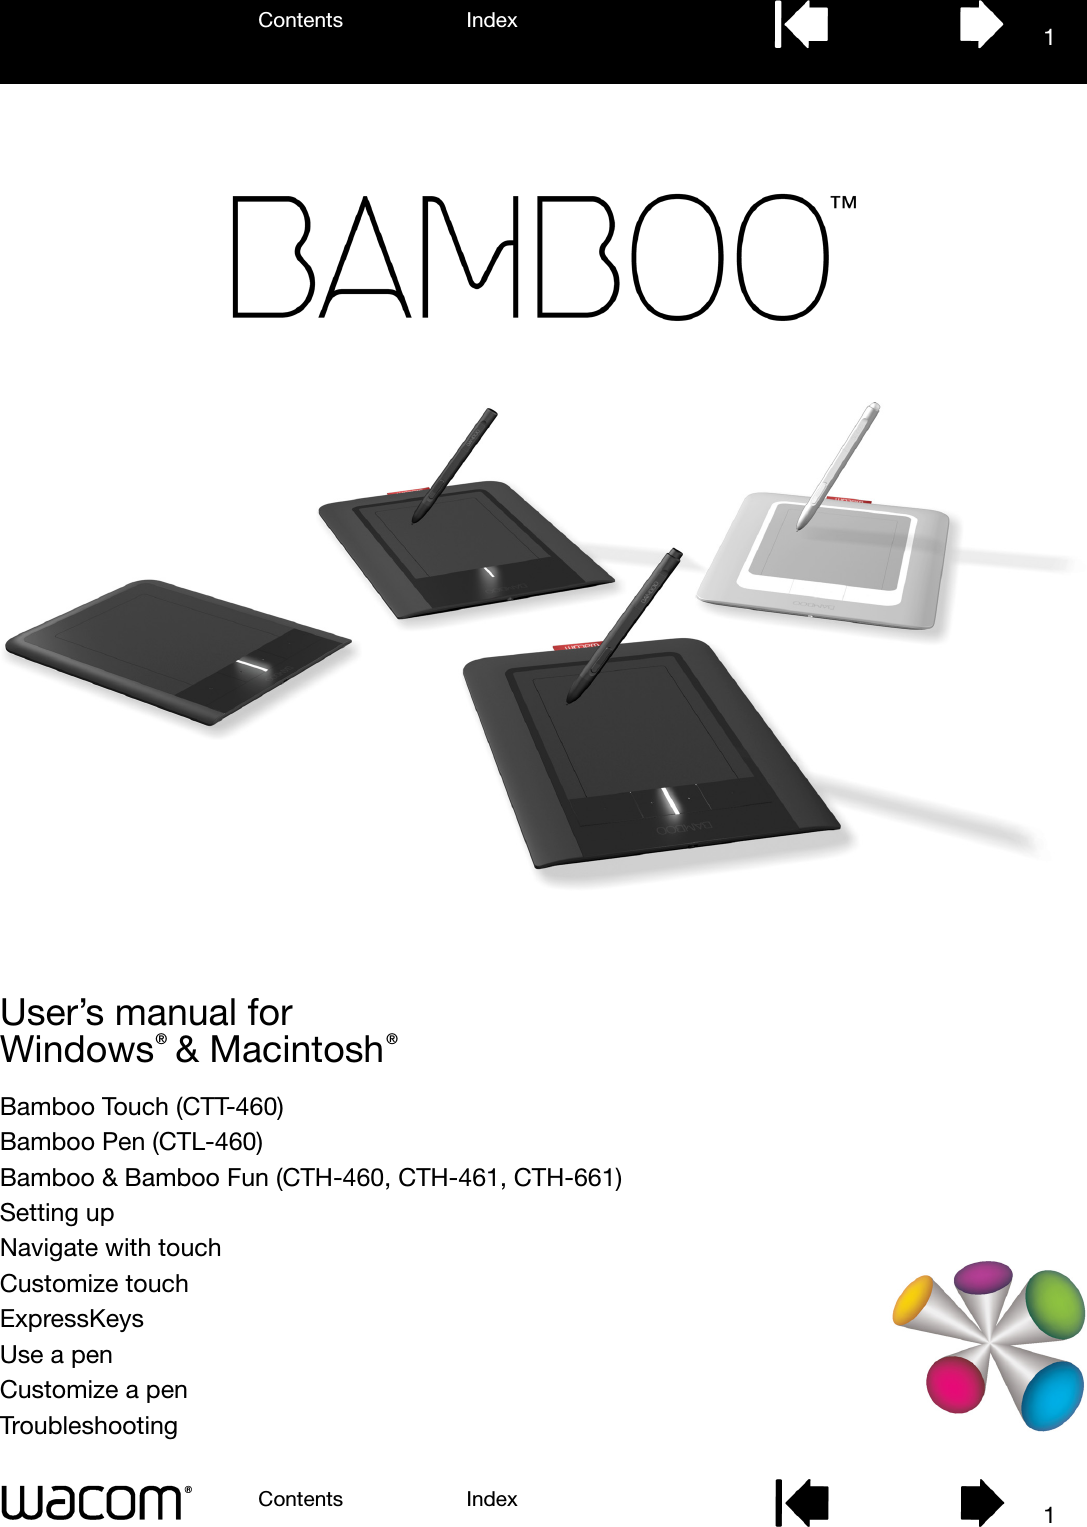 User’s manual for Windows  &amp; Macintosh®®Bamboo Touch (CTT-460)Bamboo Pen (CTL-460)Bamboo &amp; Bamboo Fun (CTH-460, CTH-461, CTH-661)Setting upNavigate with touchCustomize touchExpressKeysUse a penCustomize a penTroubleshootingContents IndexContents 1Index1